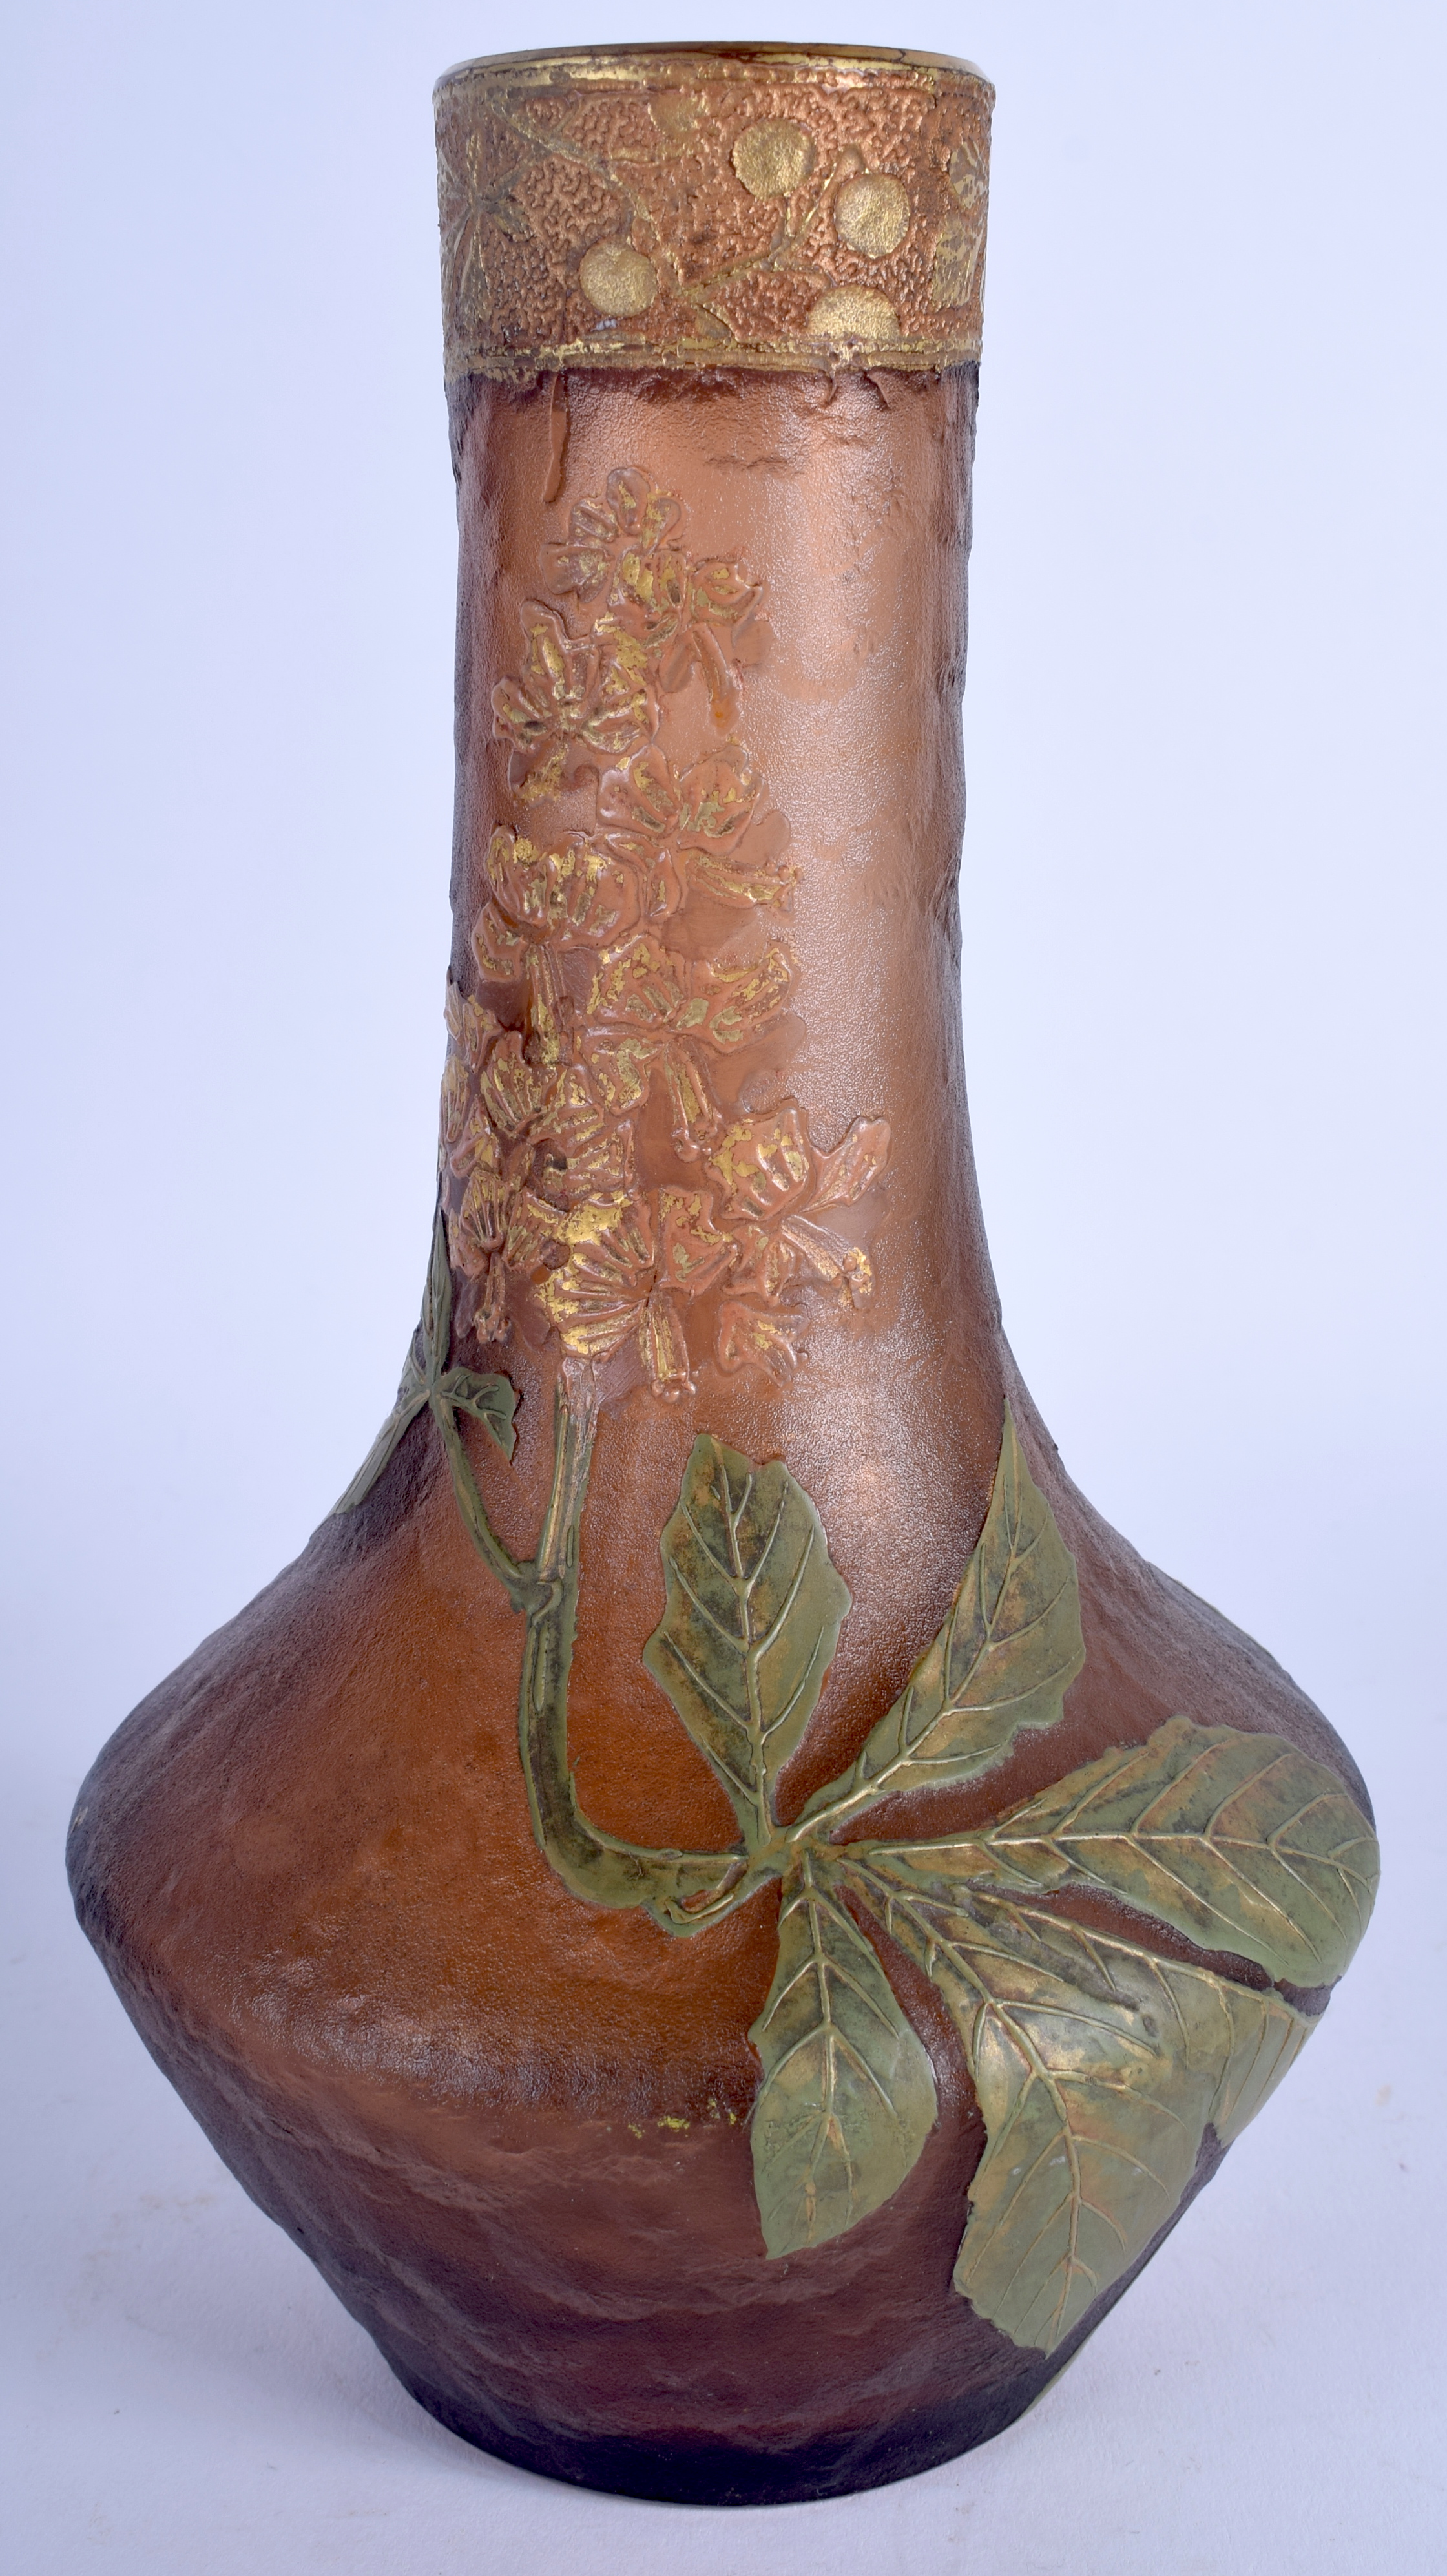 A FRENCH ART NOUVEAU CAMEO GLASS VASE enamelled with flowers and vines. 21 cm high.